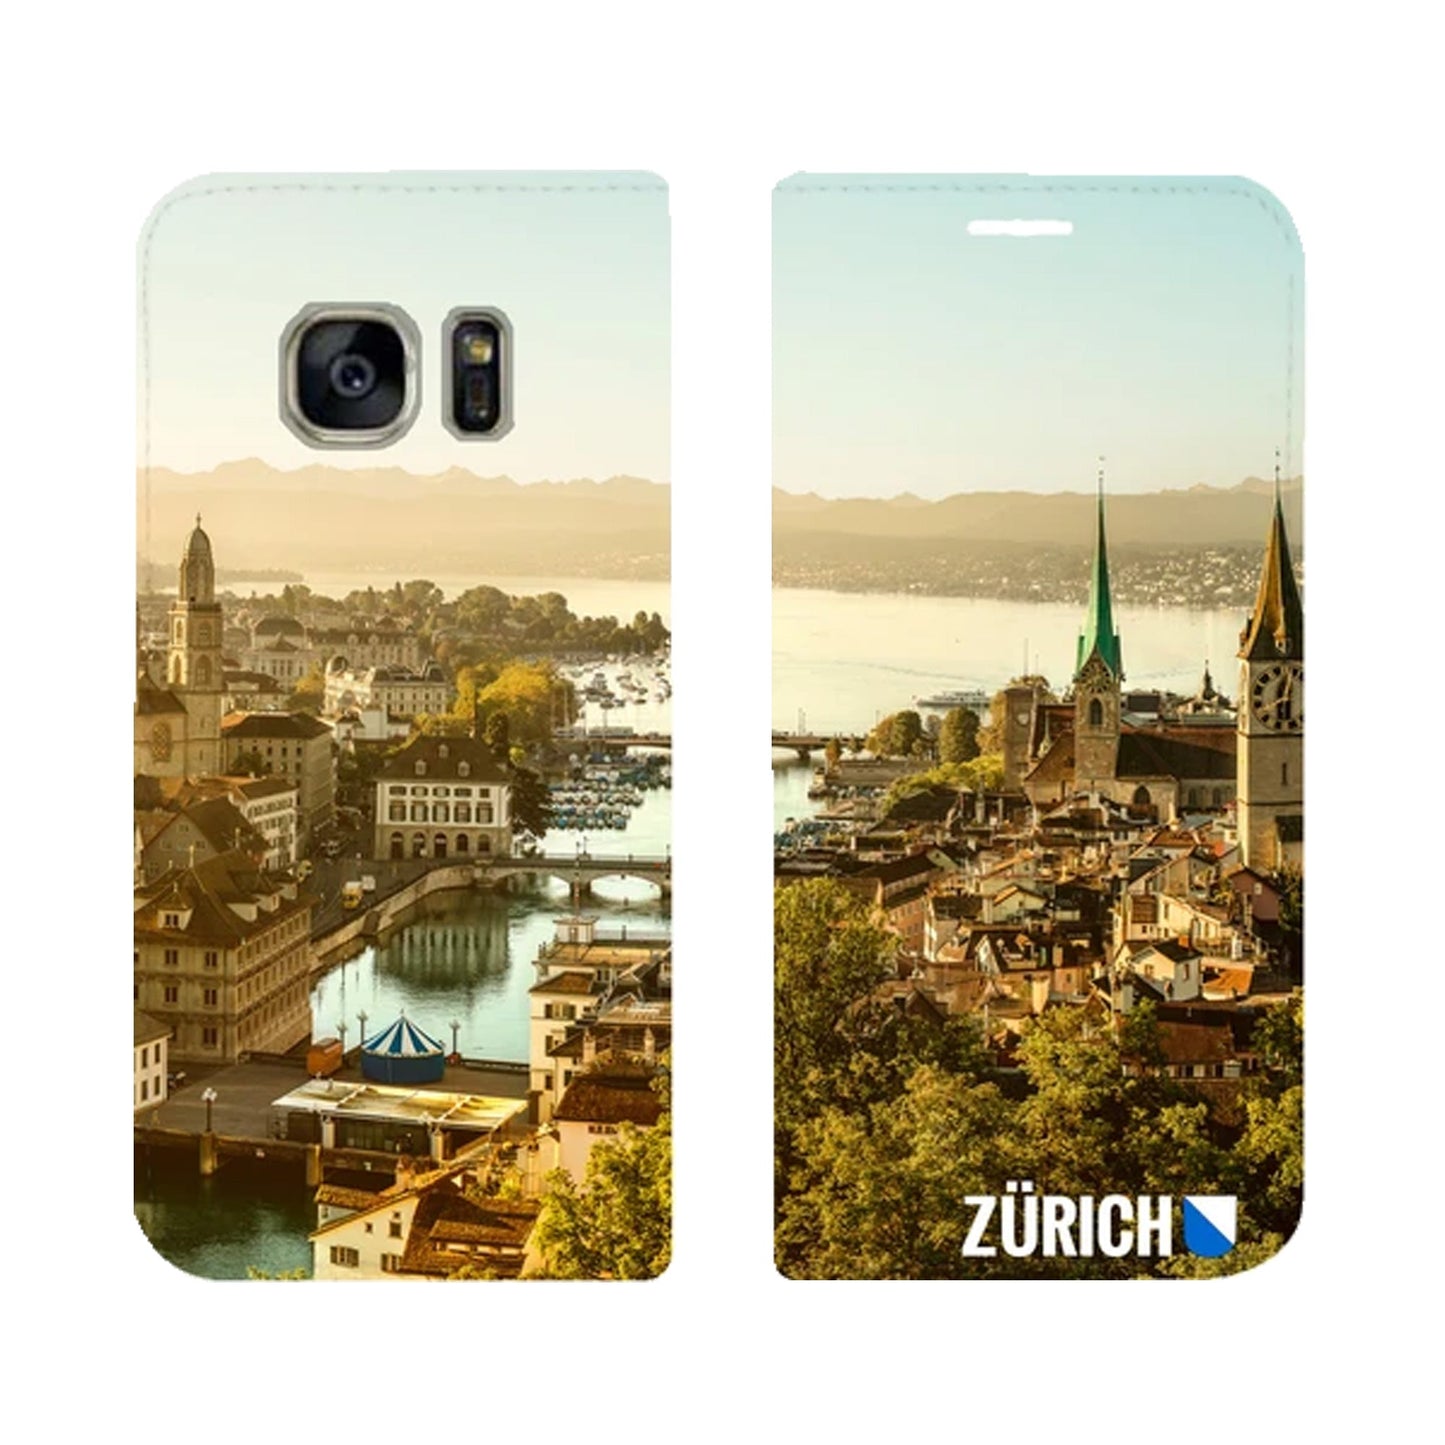 Zurich City from Above Panorama for Samsung Galaxy S7